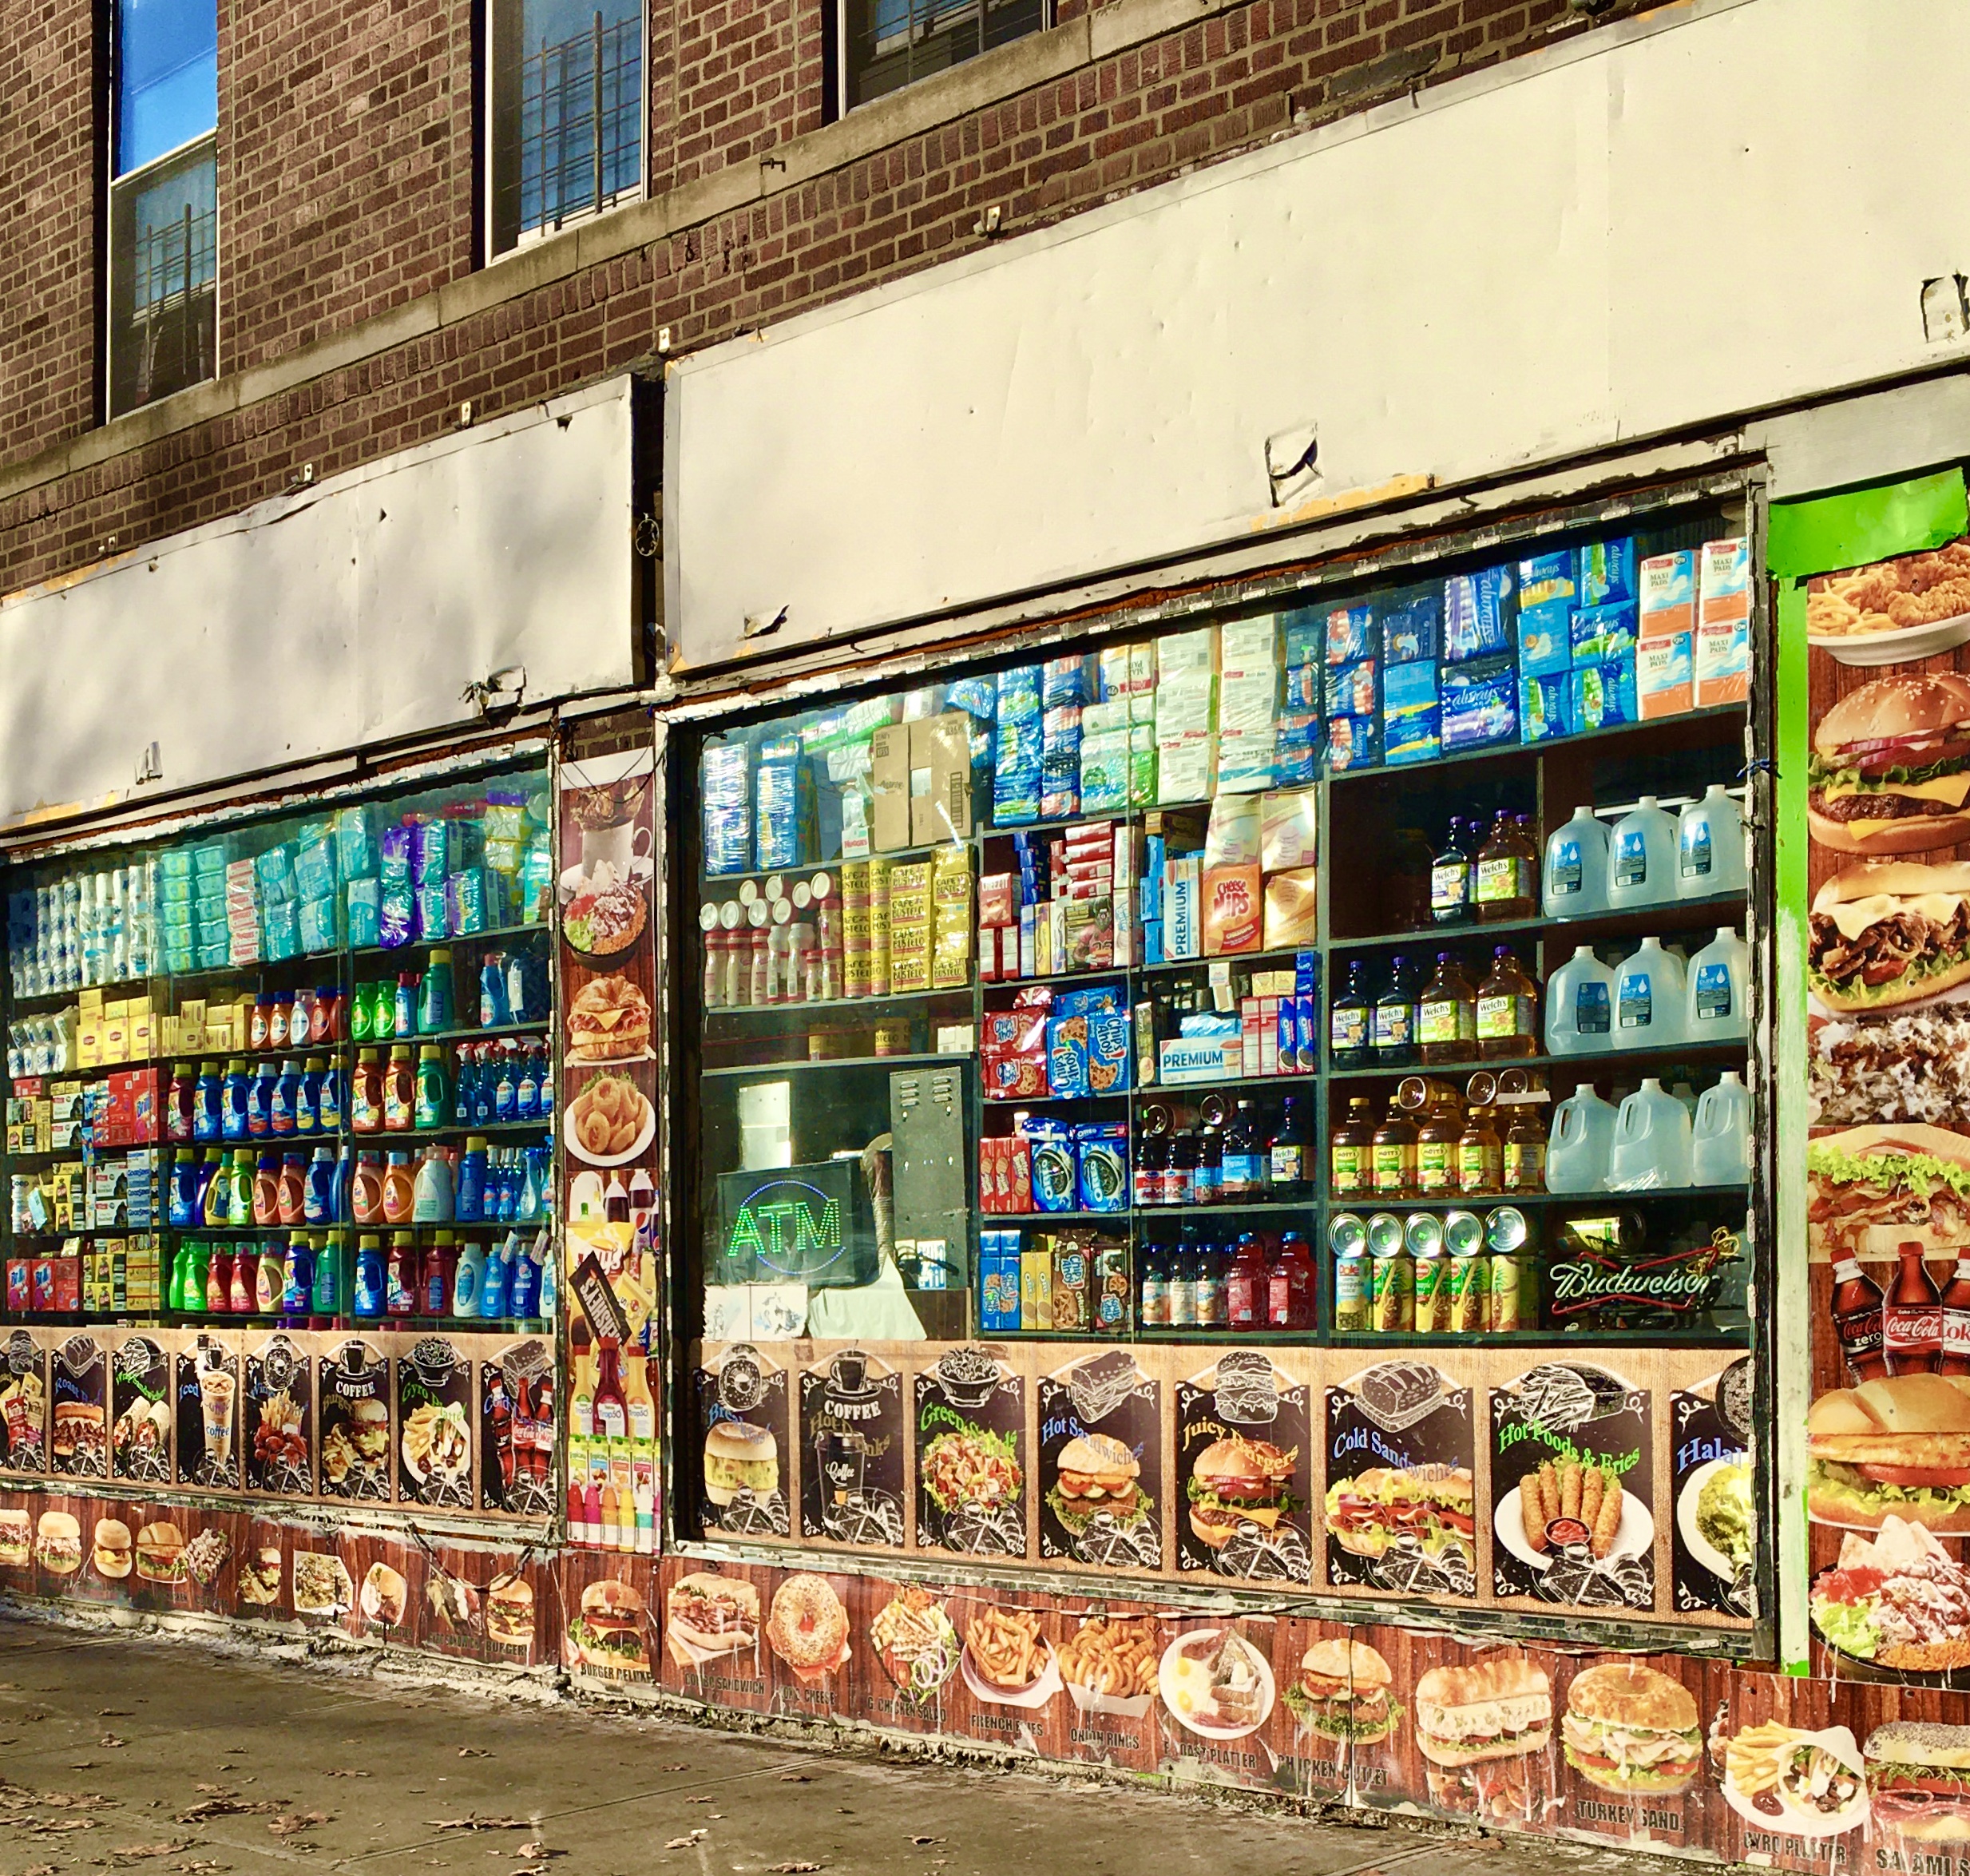 This eye-catching deli window is on the corner of Gates and Marcy avenues. Photo: Lore Croghan/Brooklyn Eagle